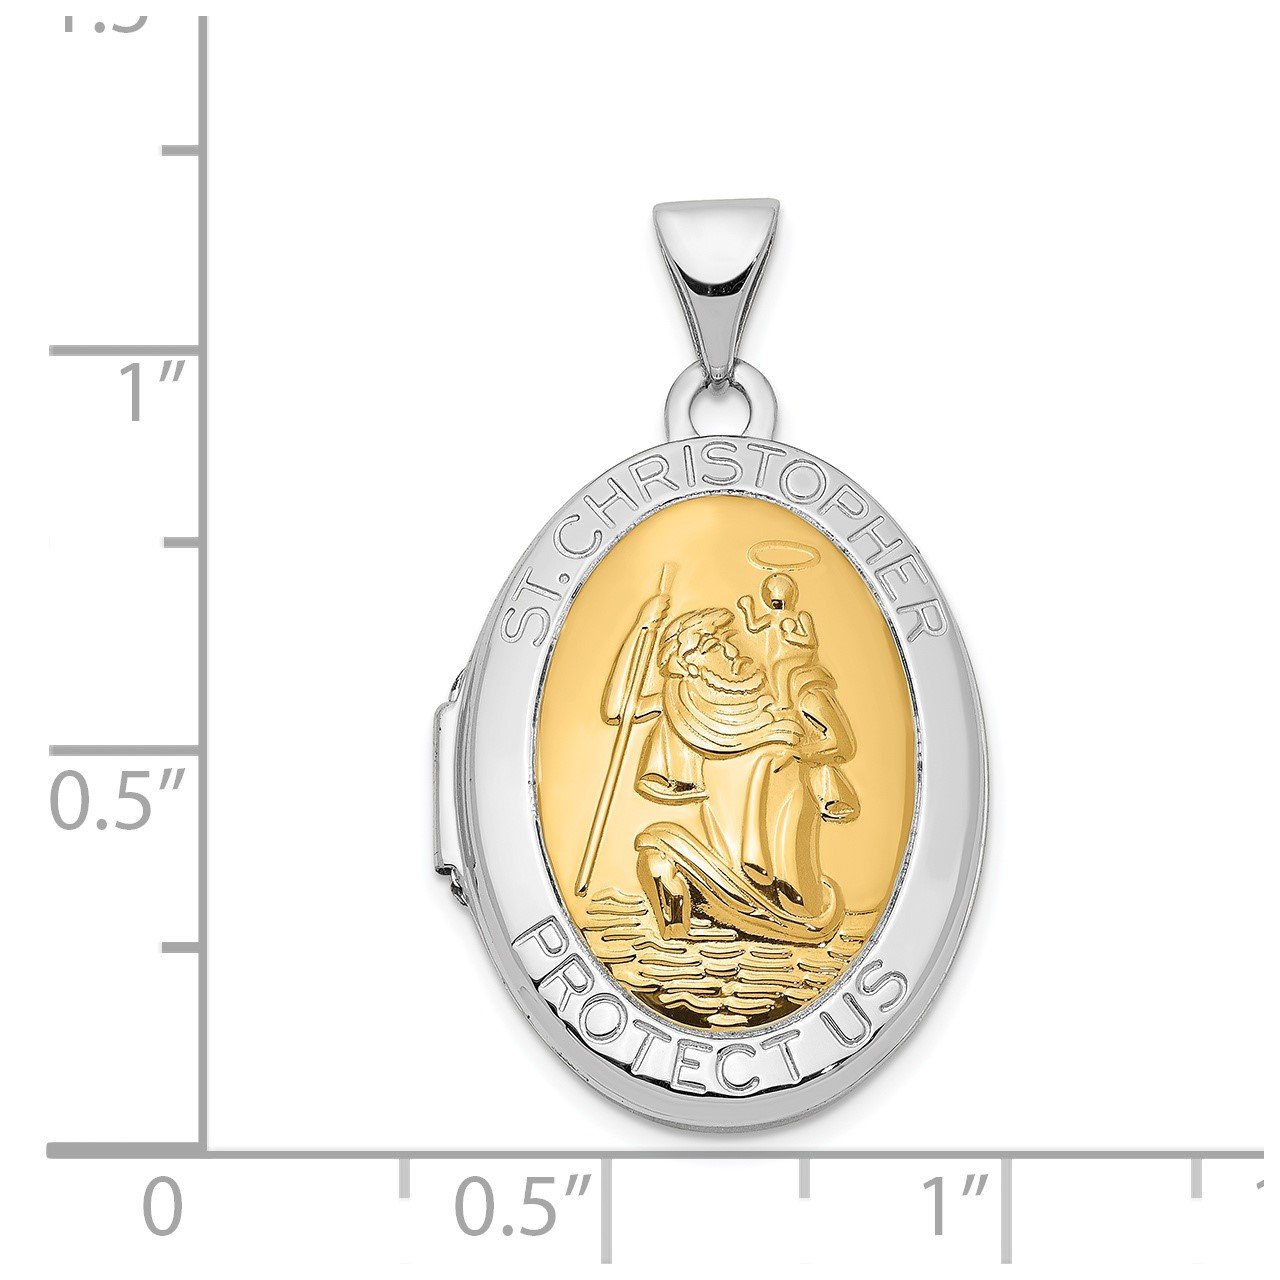 14K White Gold with Yellow Gold accent 23mm Saint Christopher Locket Pendan-2